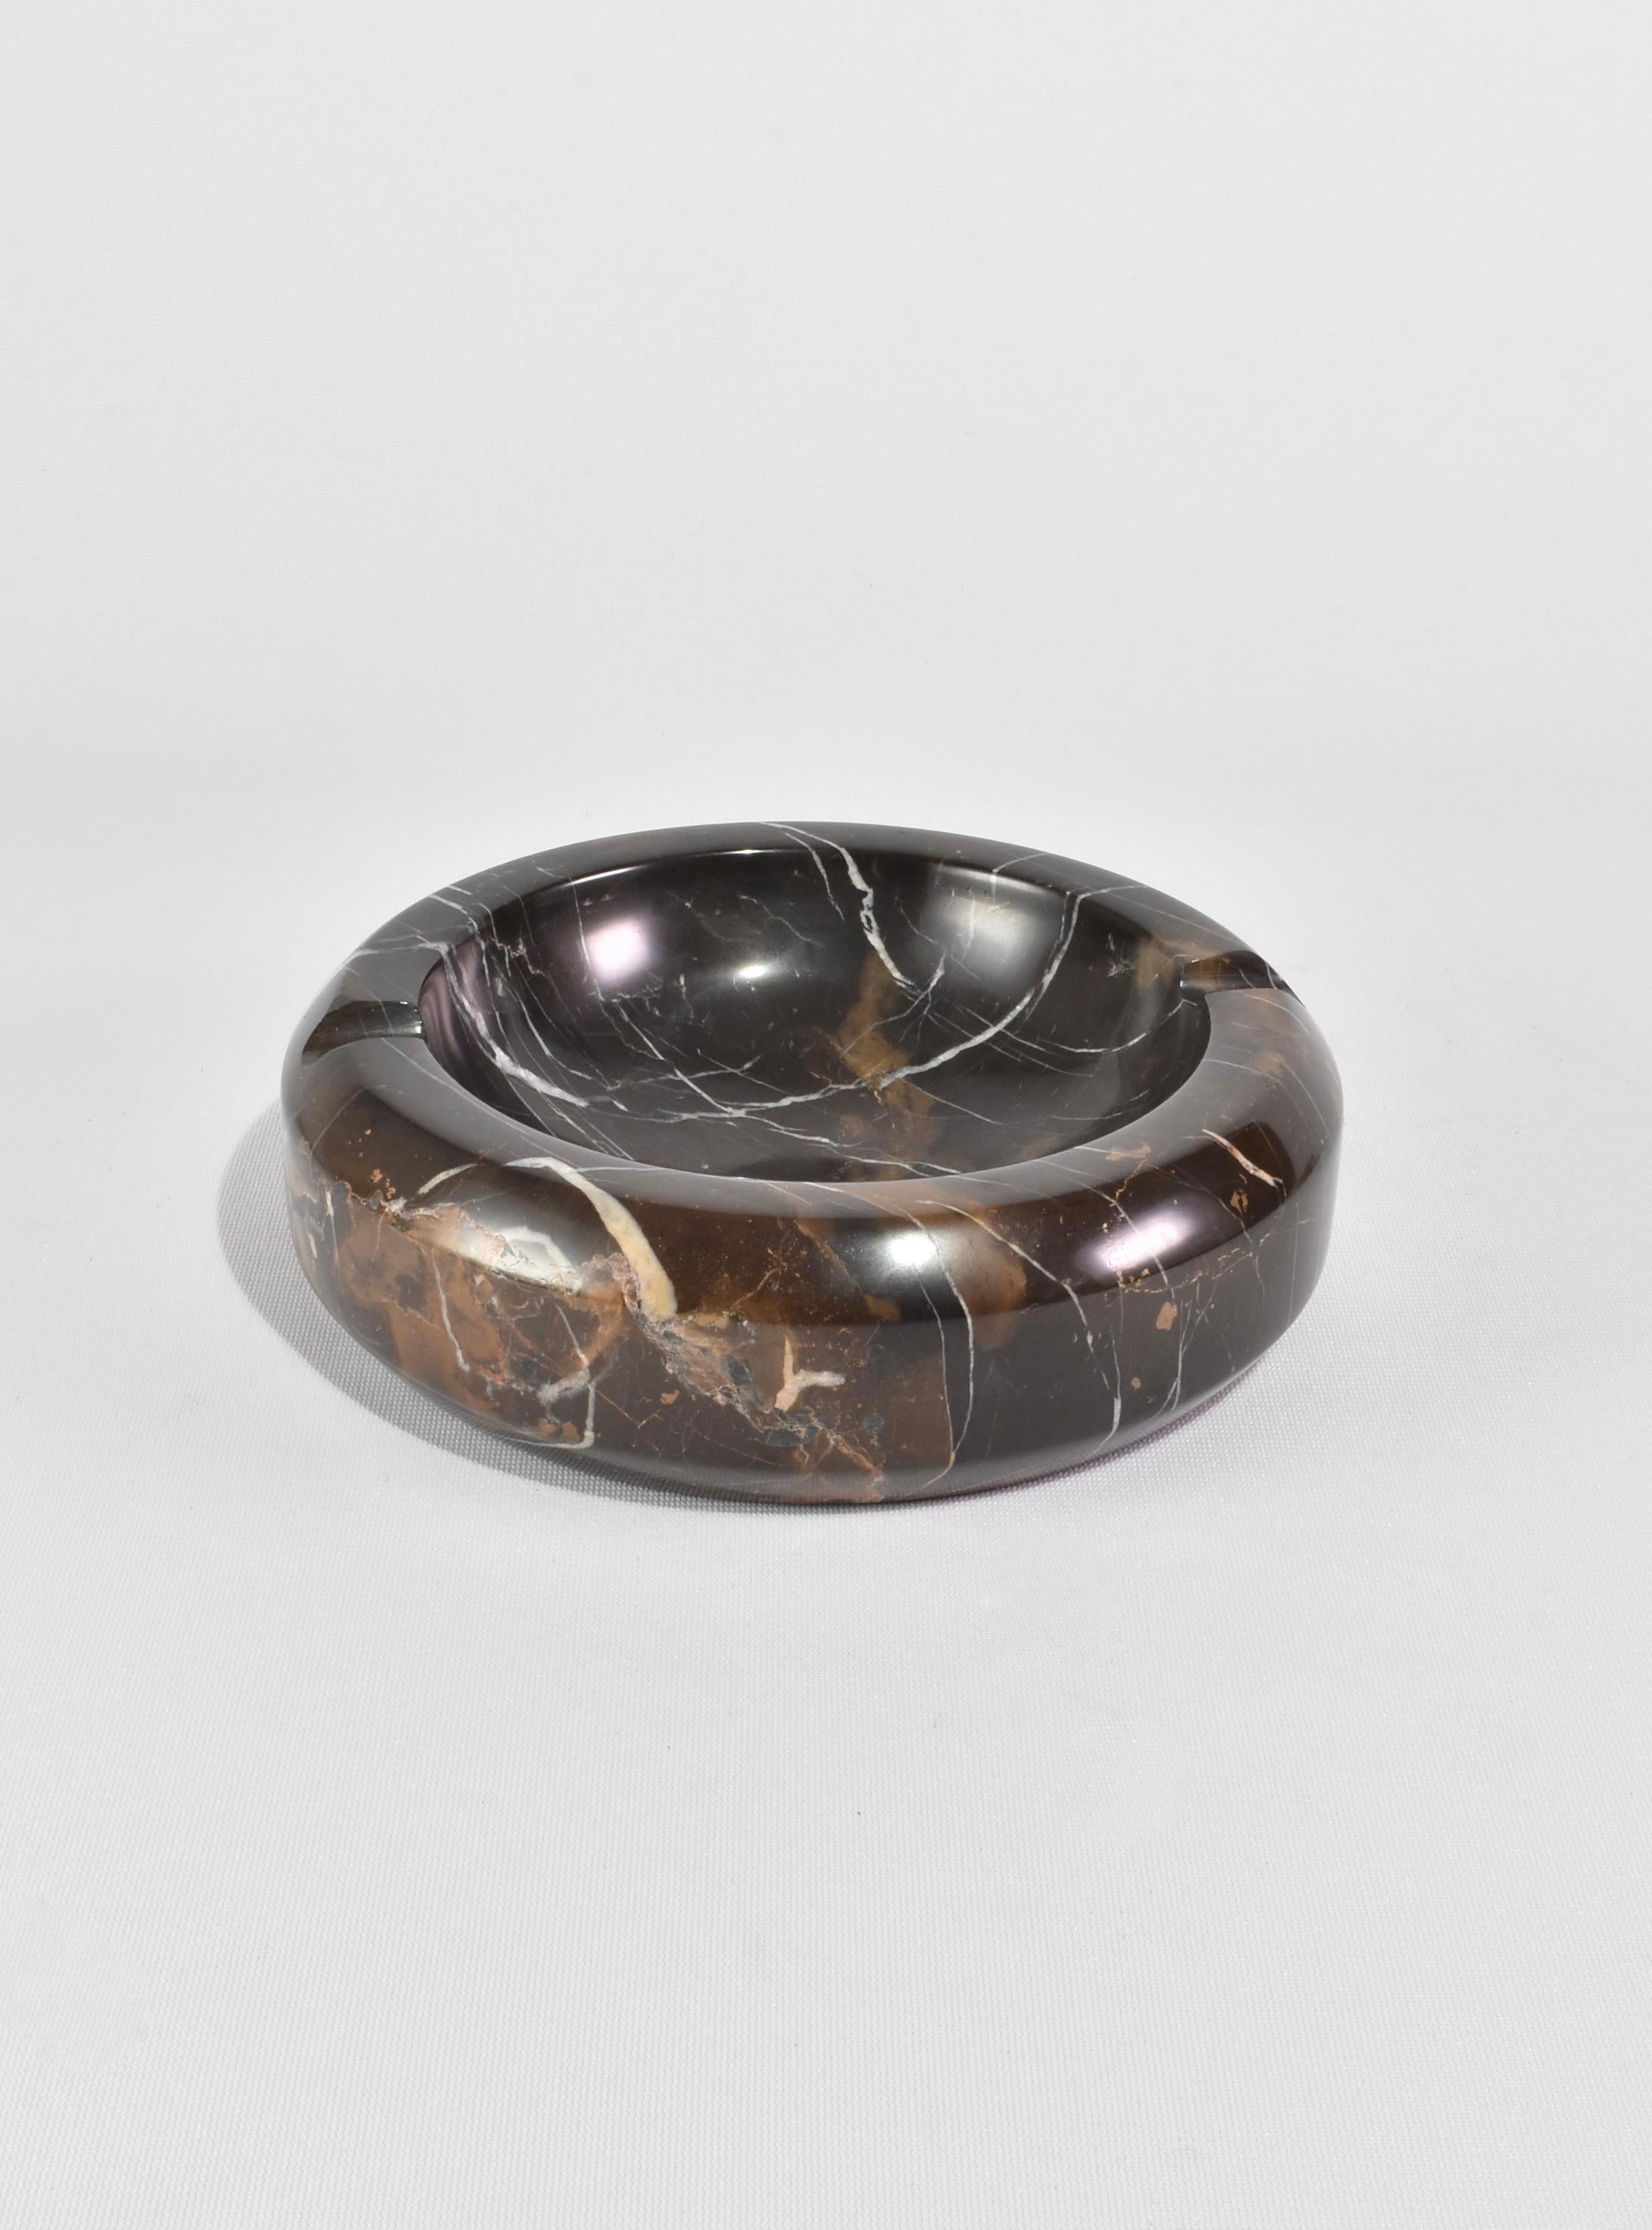 Large, round marble catchall or ashtray in shades of brown and black with white veining detail.